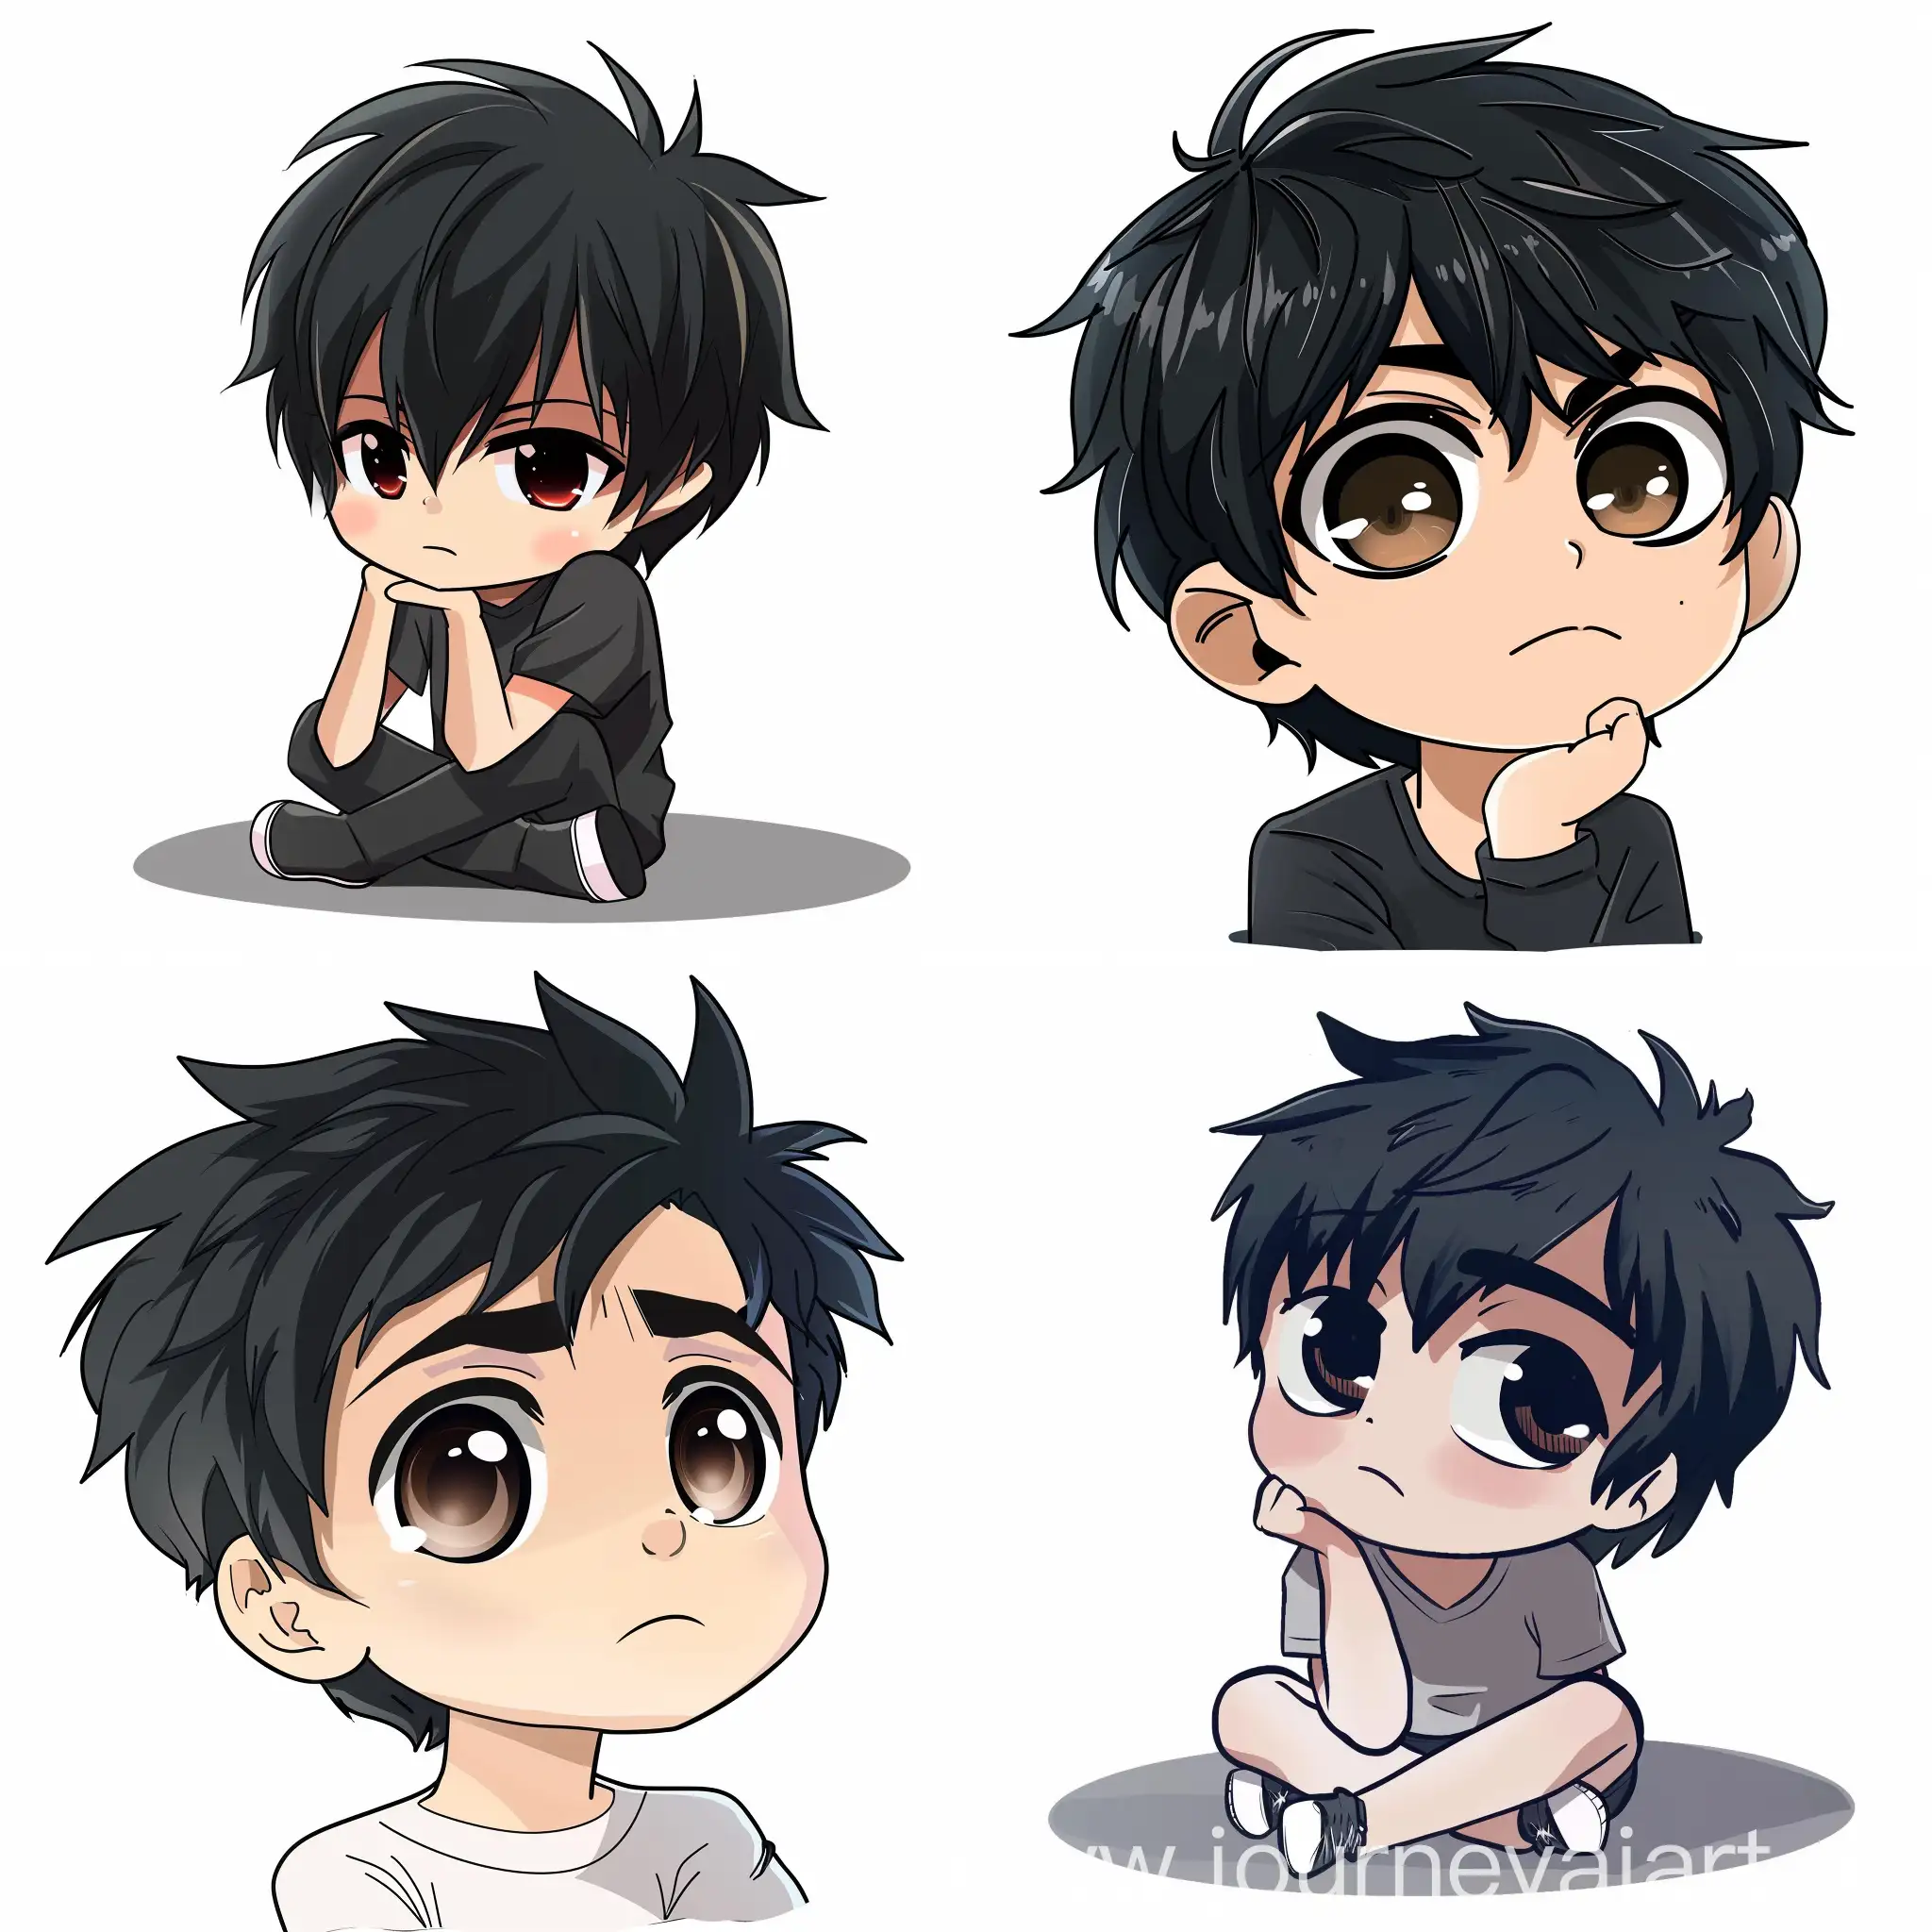 chibi guy with black and dark brown eyes thinking deeply